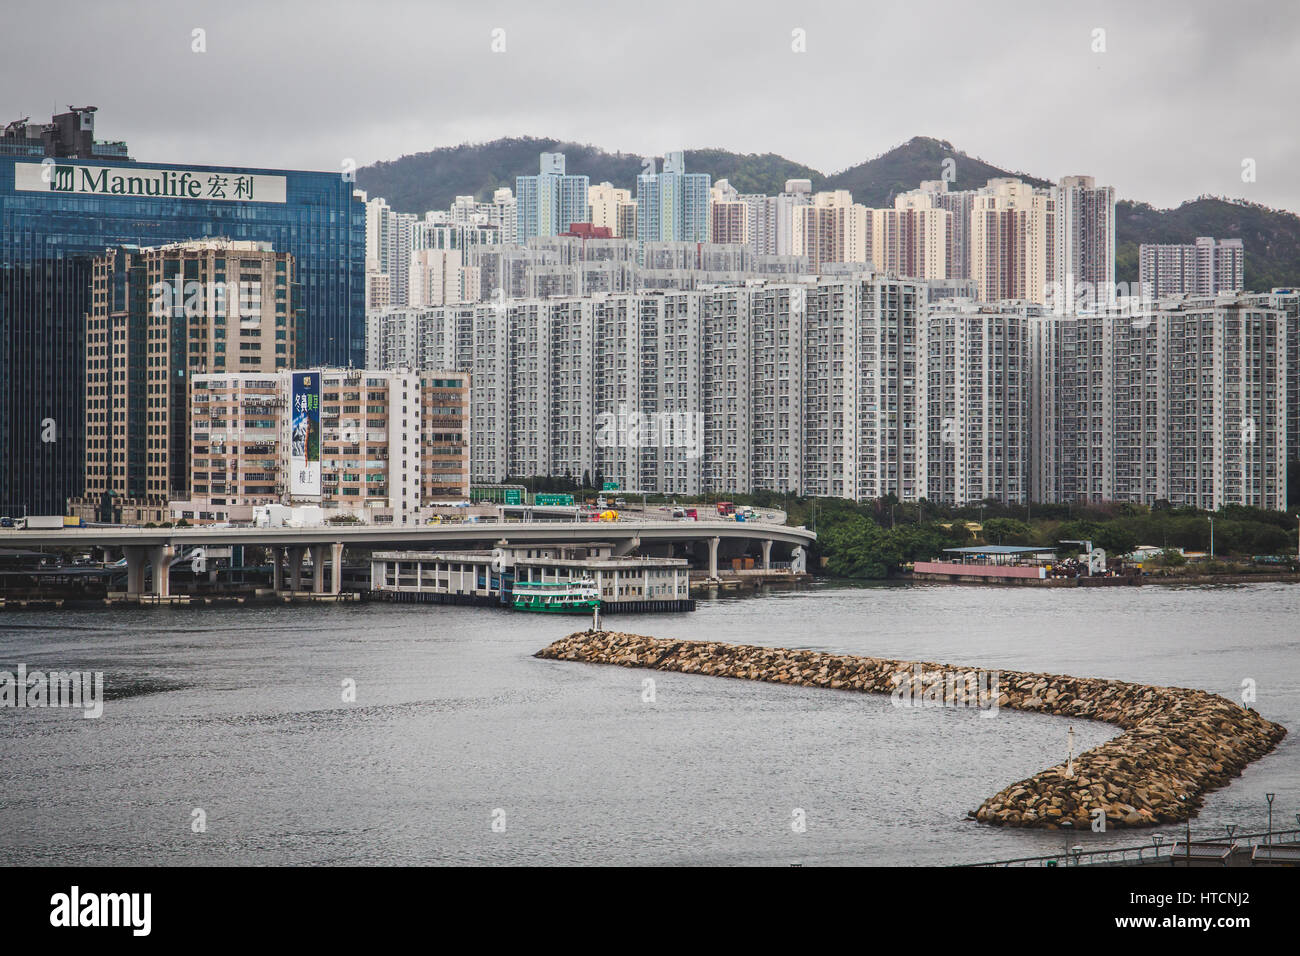 View of the Manulife Tower and Kwun Tong area across the Victoria Harbour  in Hong Kong, China Stock Photo - Alamy